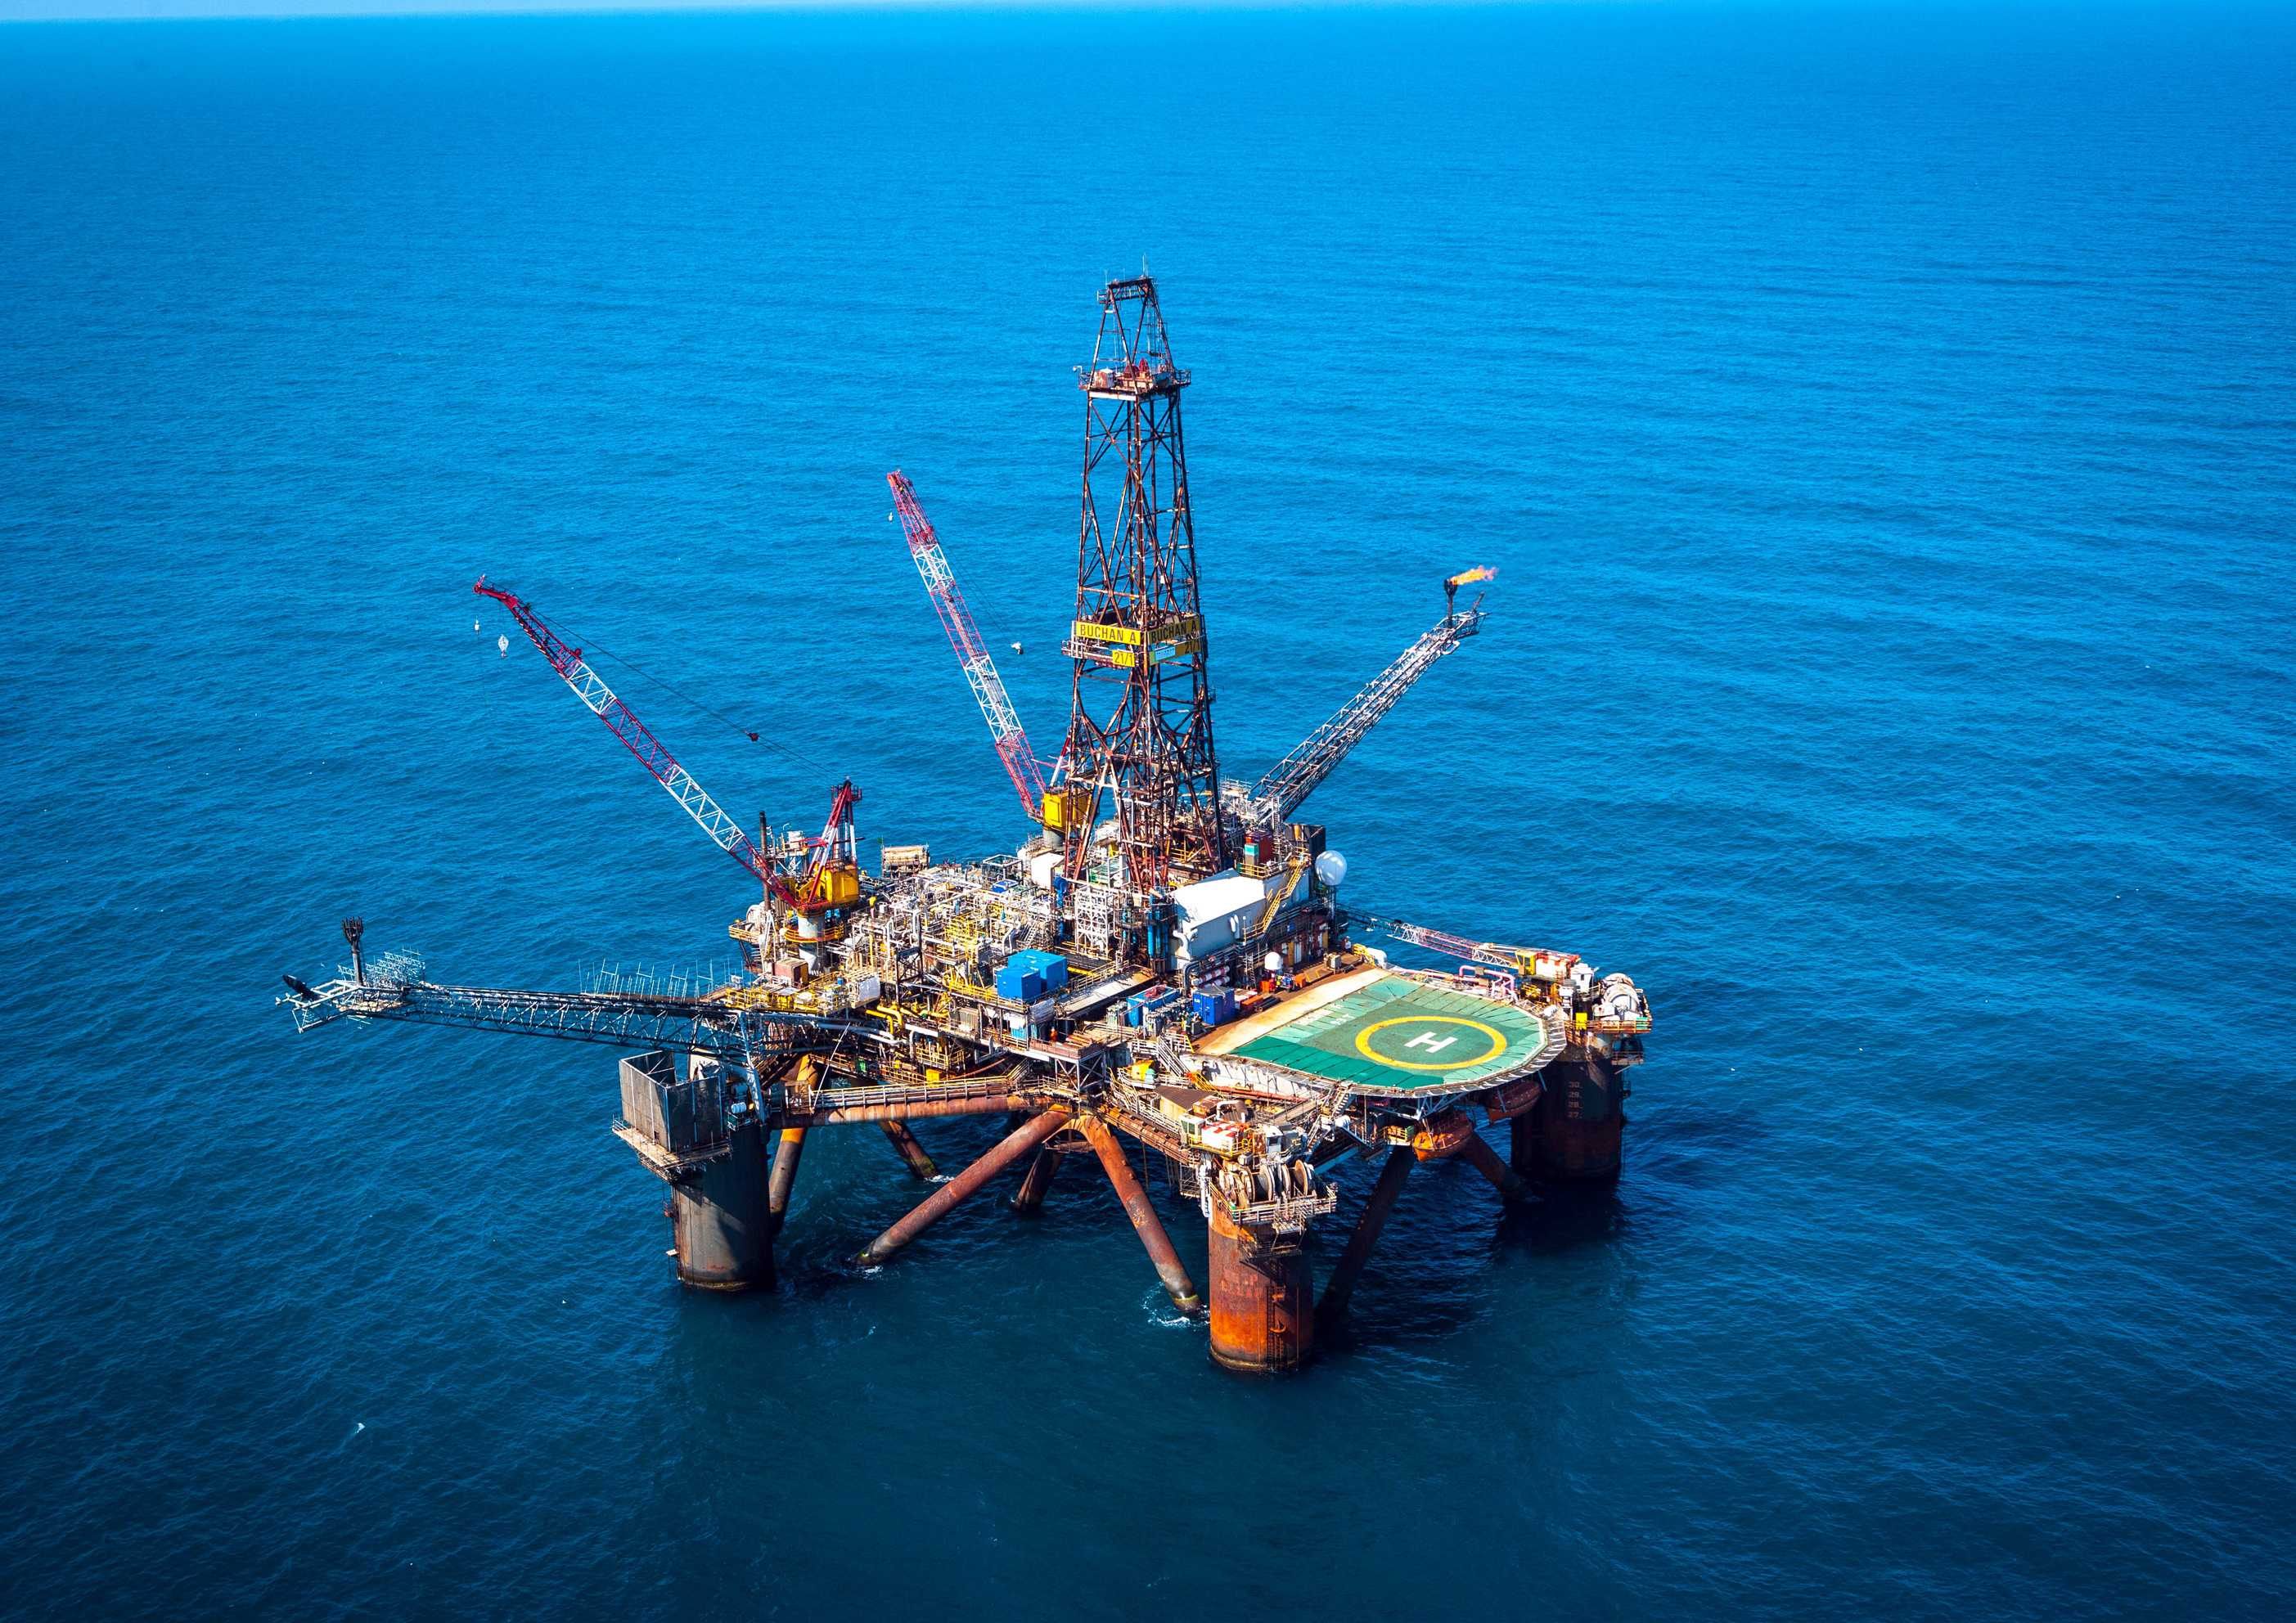 The Buchan Alpha rig has been taken to Shetland for decommissioning.